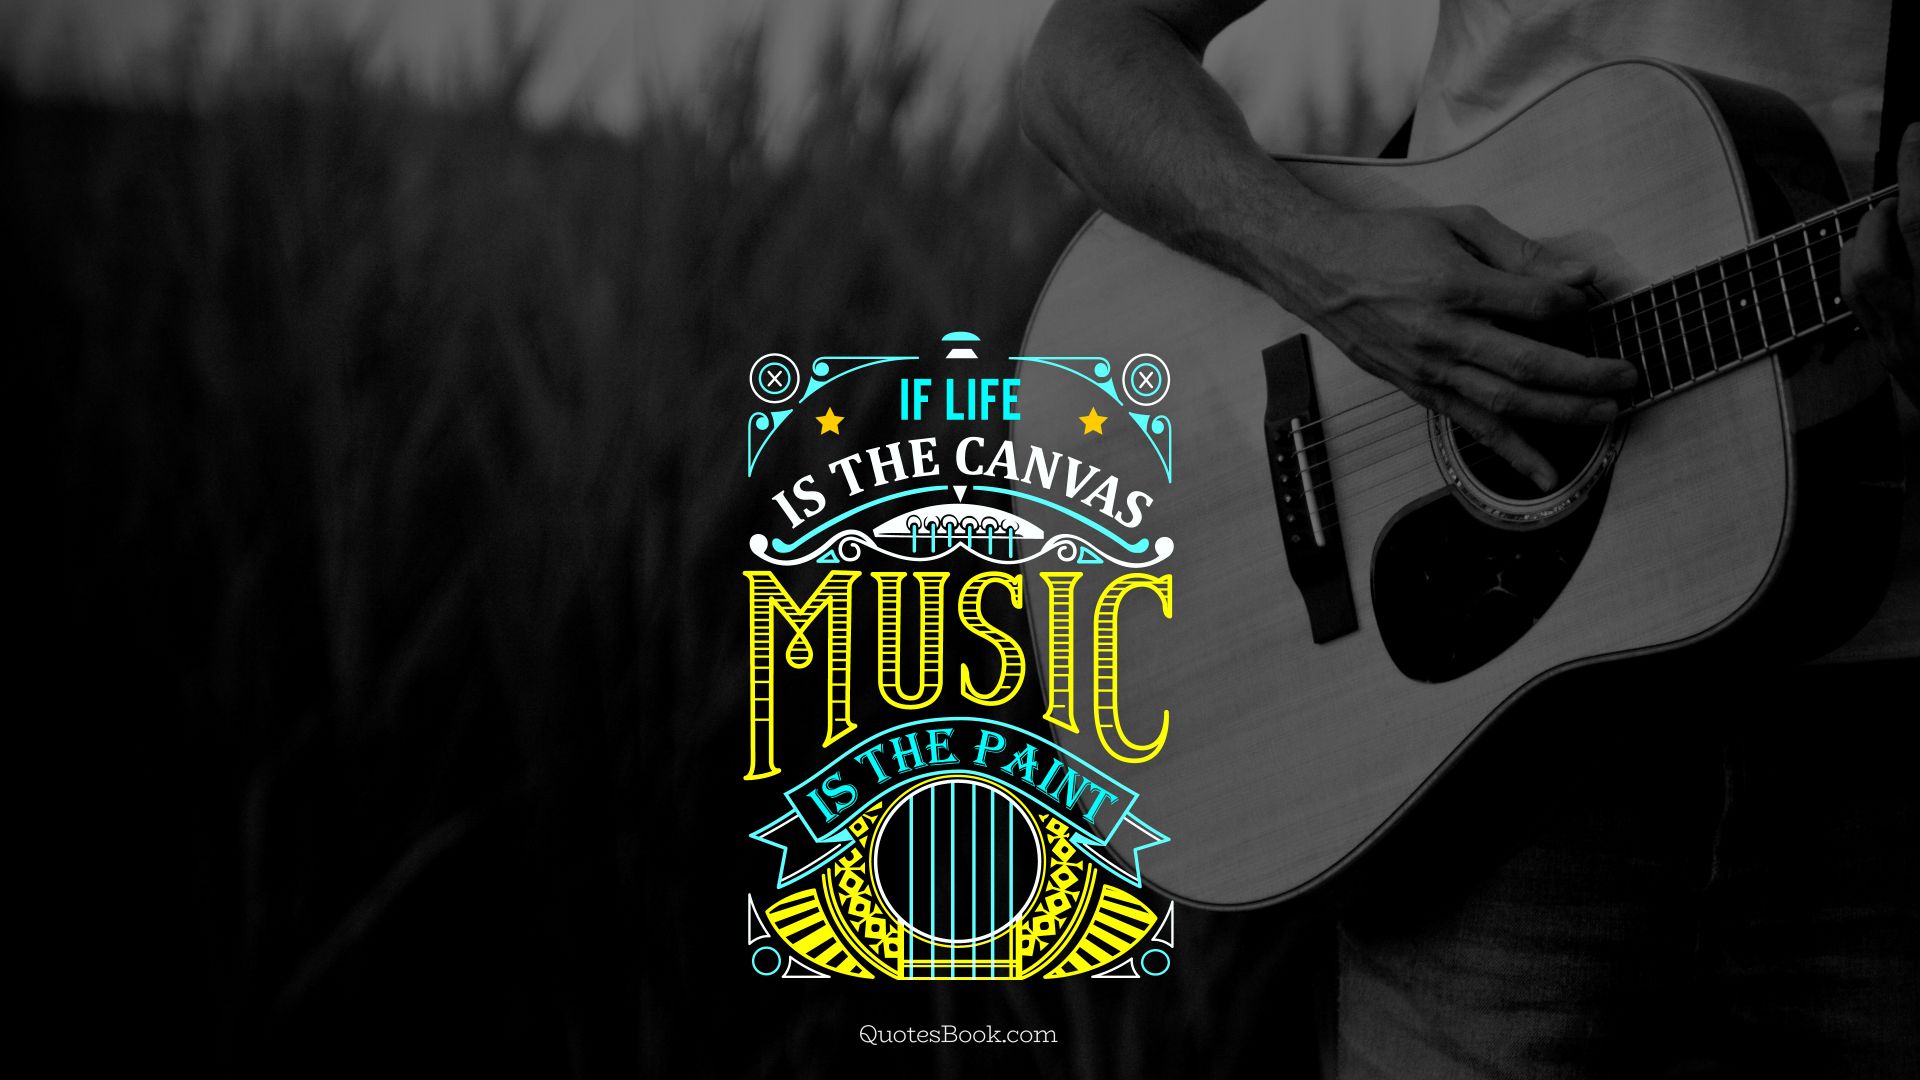 Musician Quotes About Life